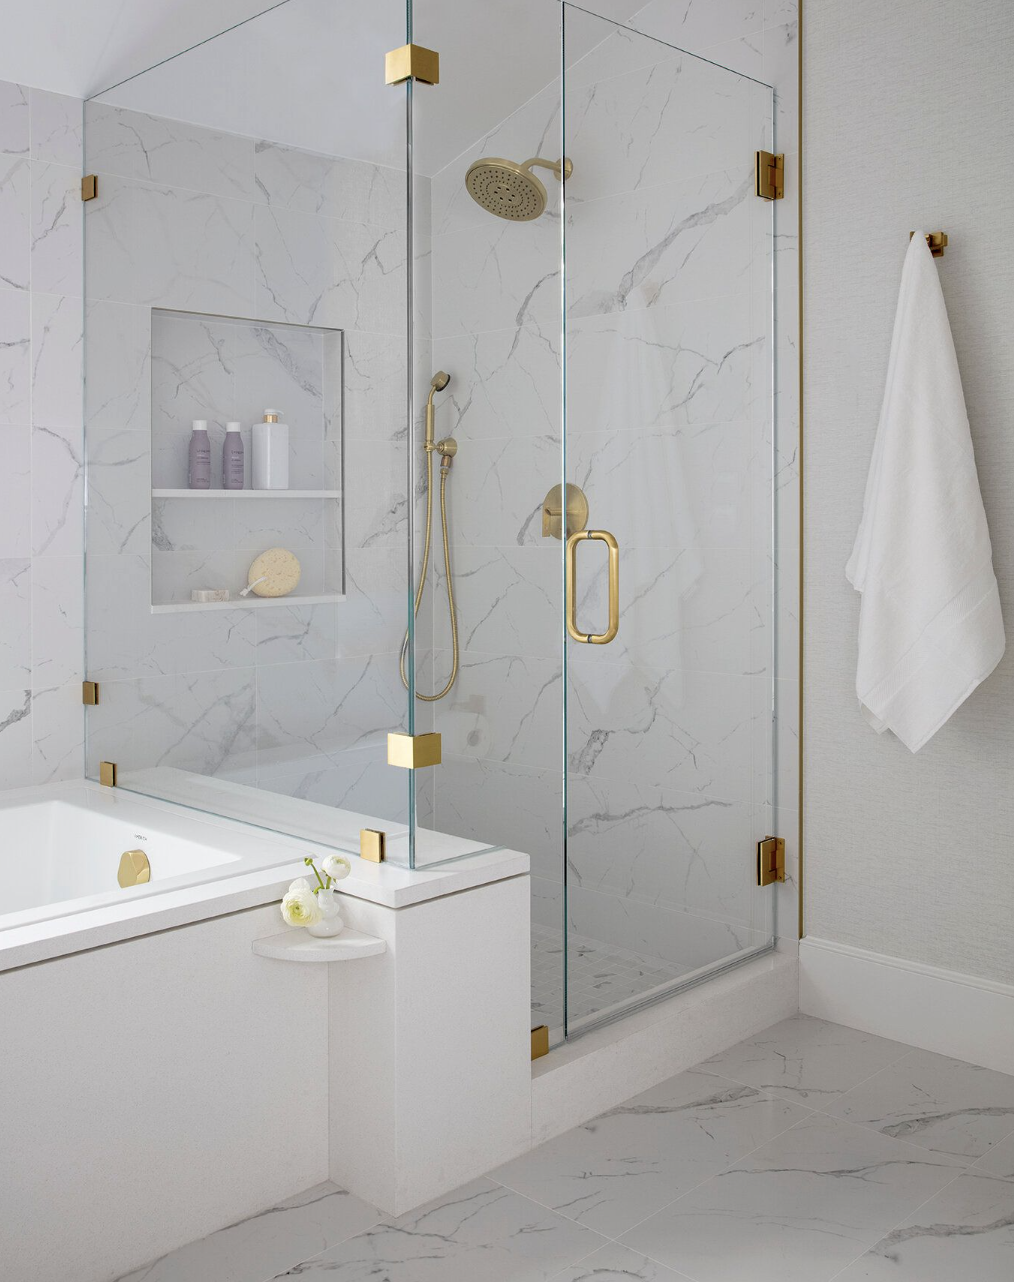 https://hips.hearstapps.com/hmg-prod/images/walk-in-shower-ideas-gold-fixtures-643ac8028429a.png